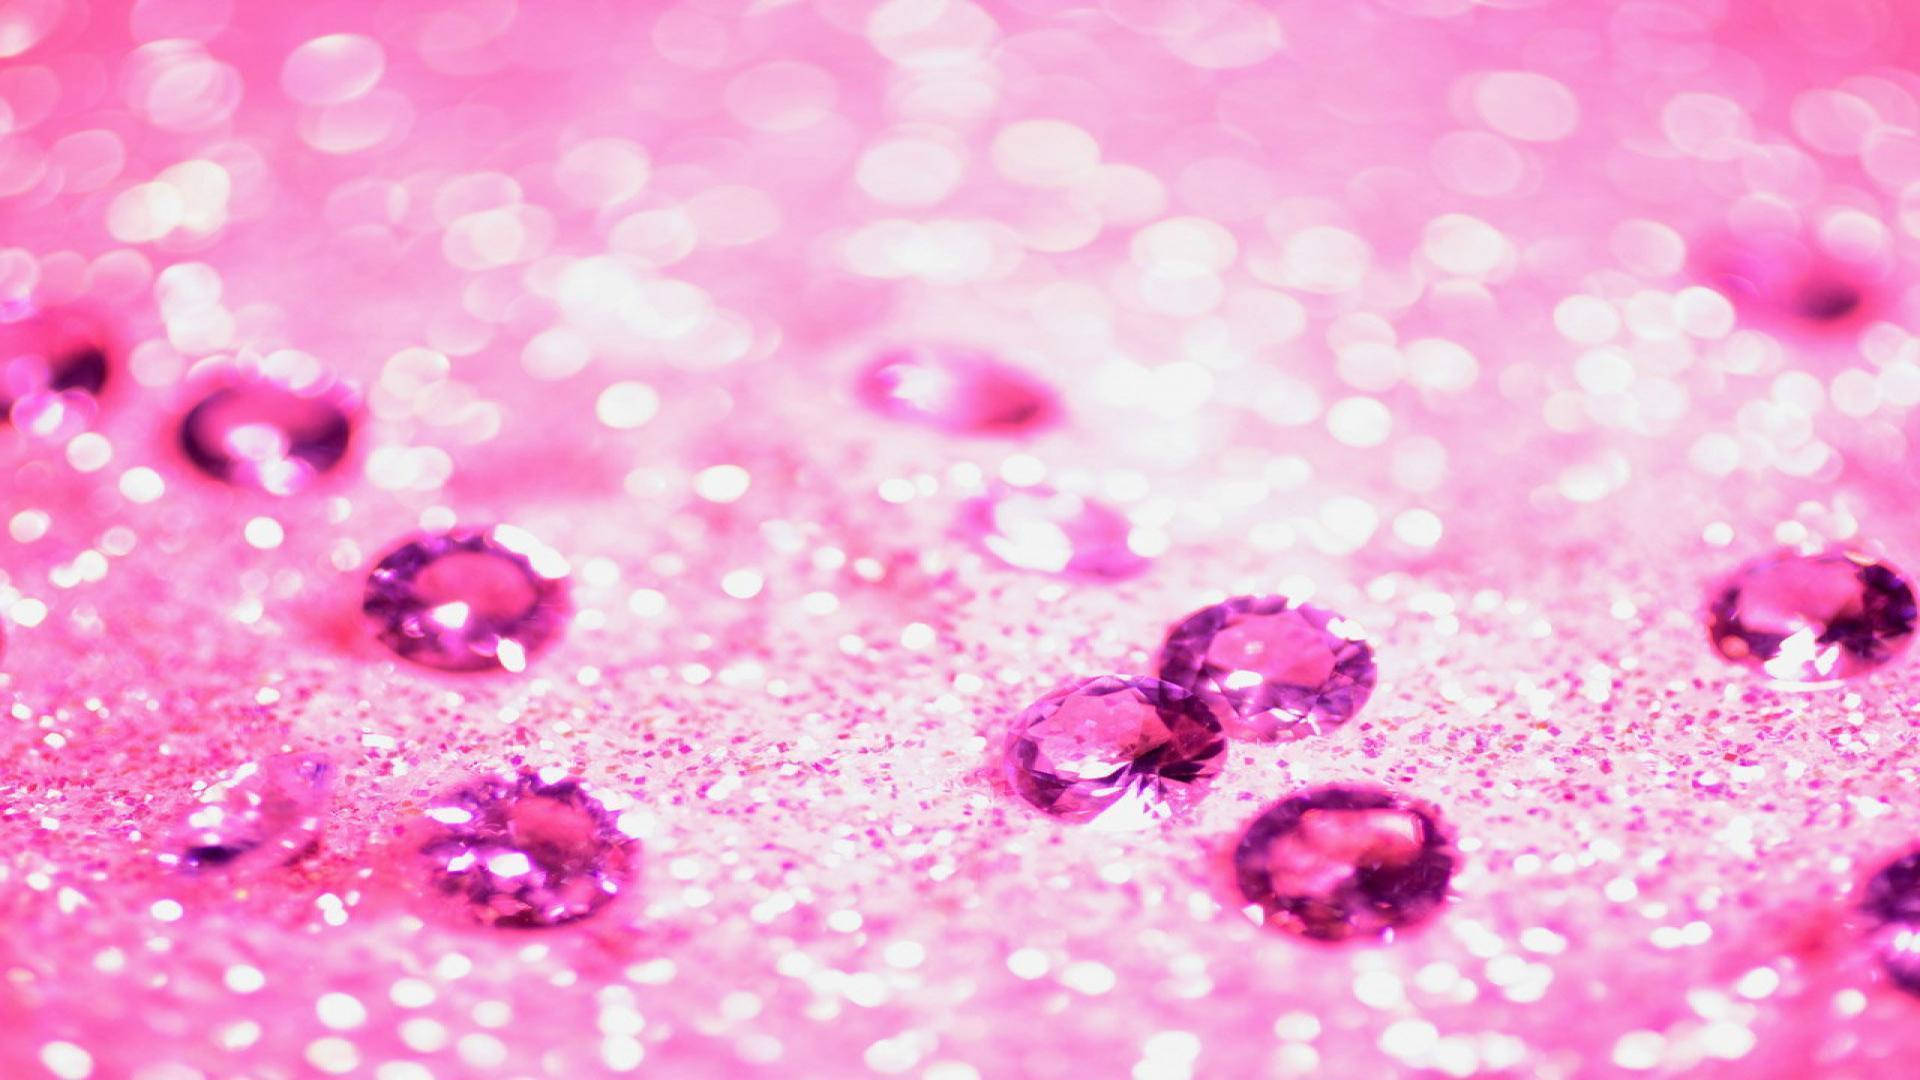 Free Pink Glitter Wallpaper Downloads, [100+] Pink Glitter Wallpapers for  FREE 